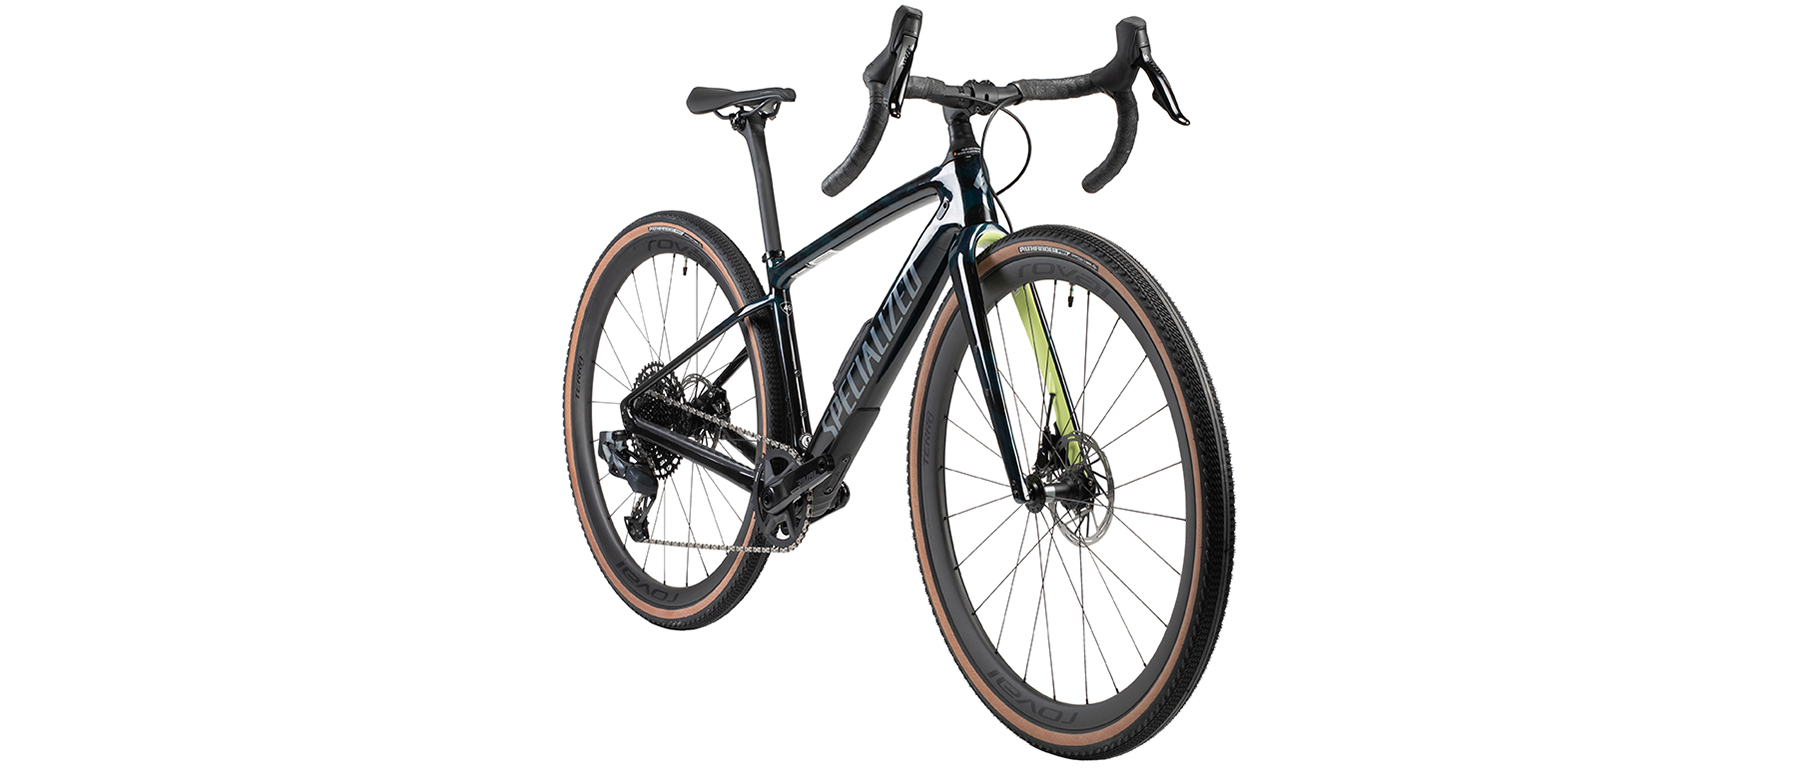 Specialized Diverge Expert Carbon Bicycle 2022